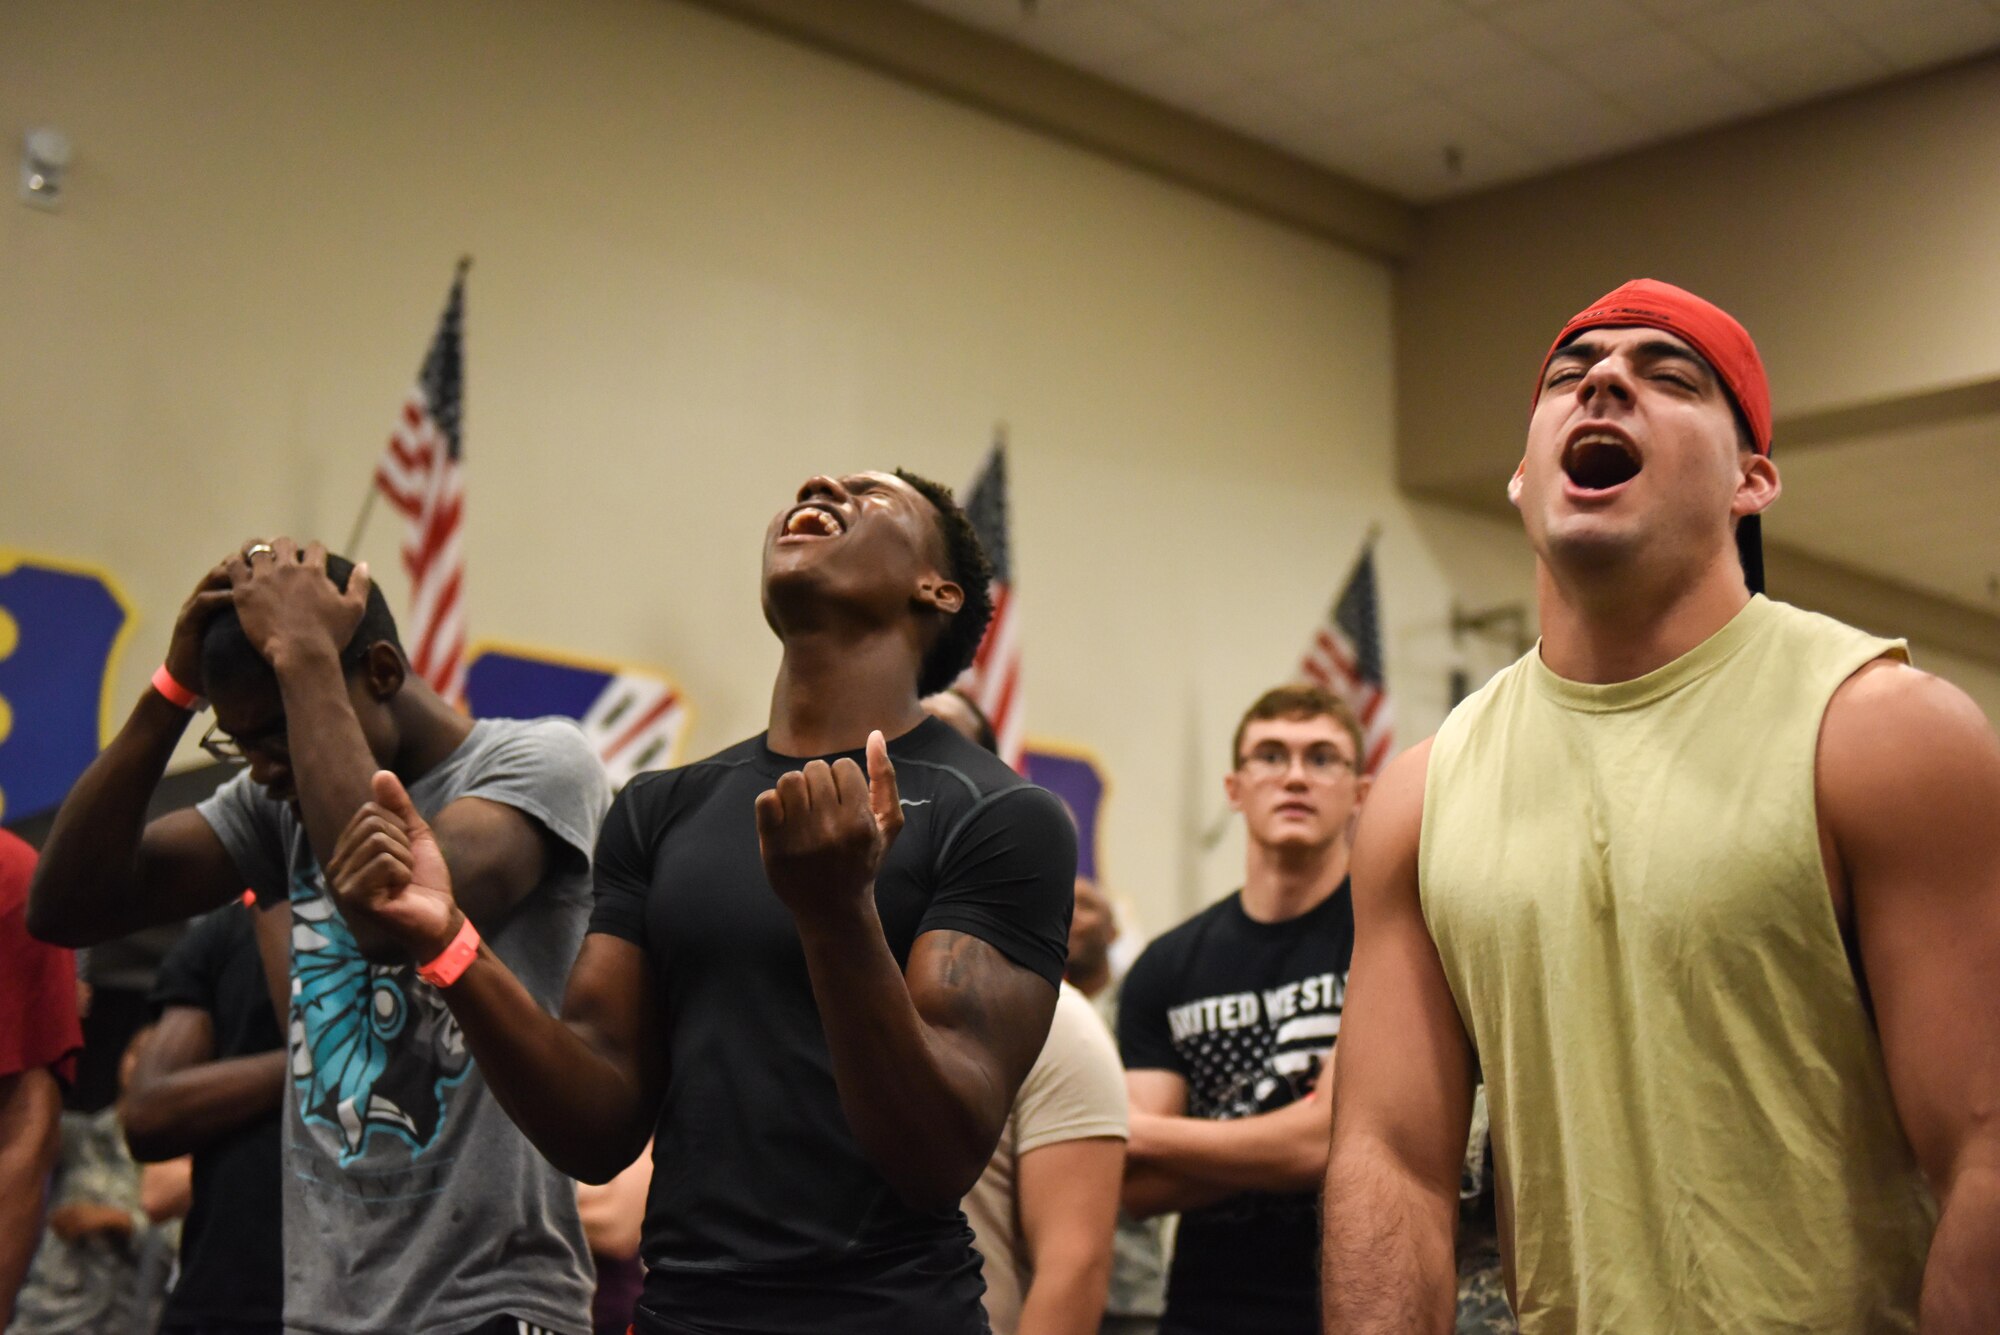 Members of Team Barksdale react to one of their fellow wingmen as they attempt the Alpha Warrior course at Barksdale Air Force Base, La., July 11, 2017. The Alpha Warrior flagship location in San Antonio, TX holds the largest pure obstacle installment available to civilians and military members for competition. (U.S. Air Force photo/Airman 1st Class Stuart Bright)